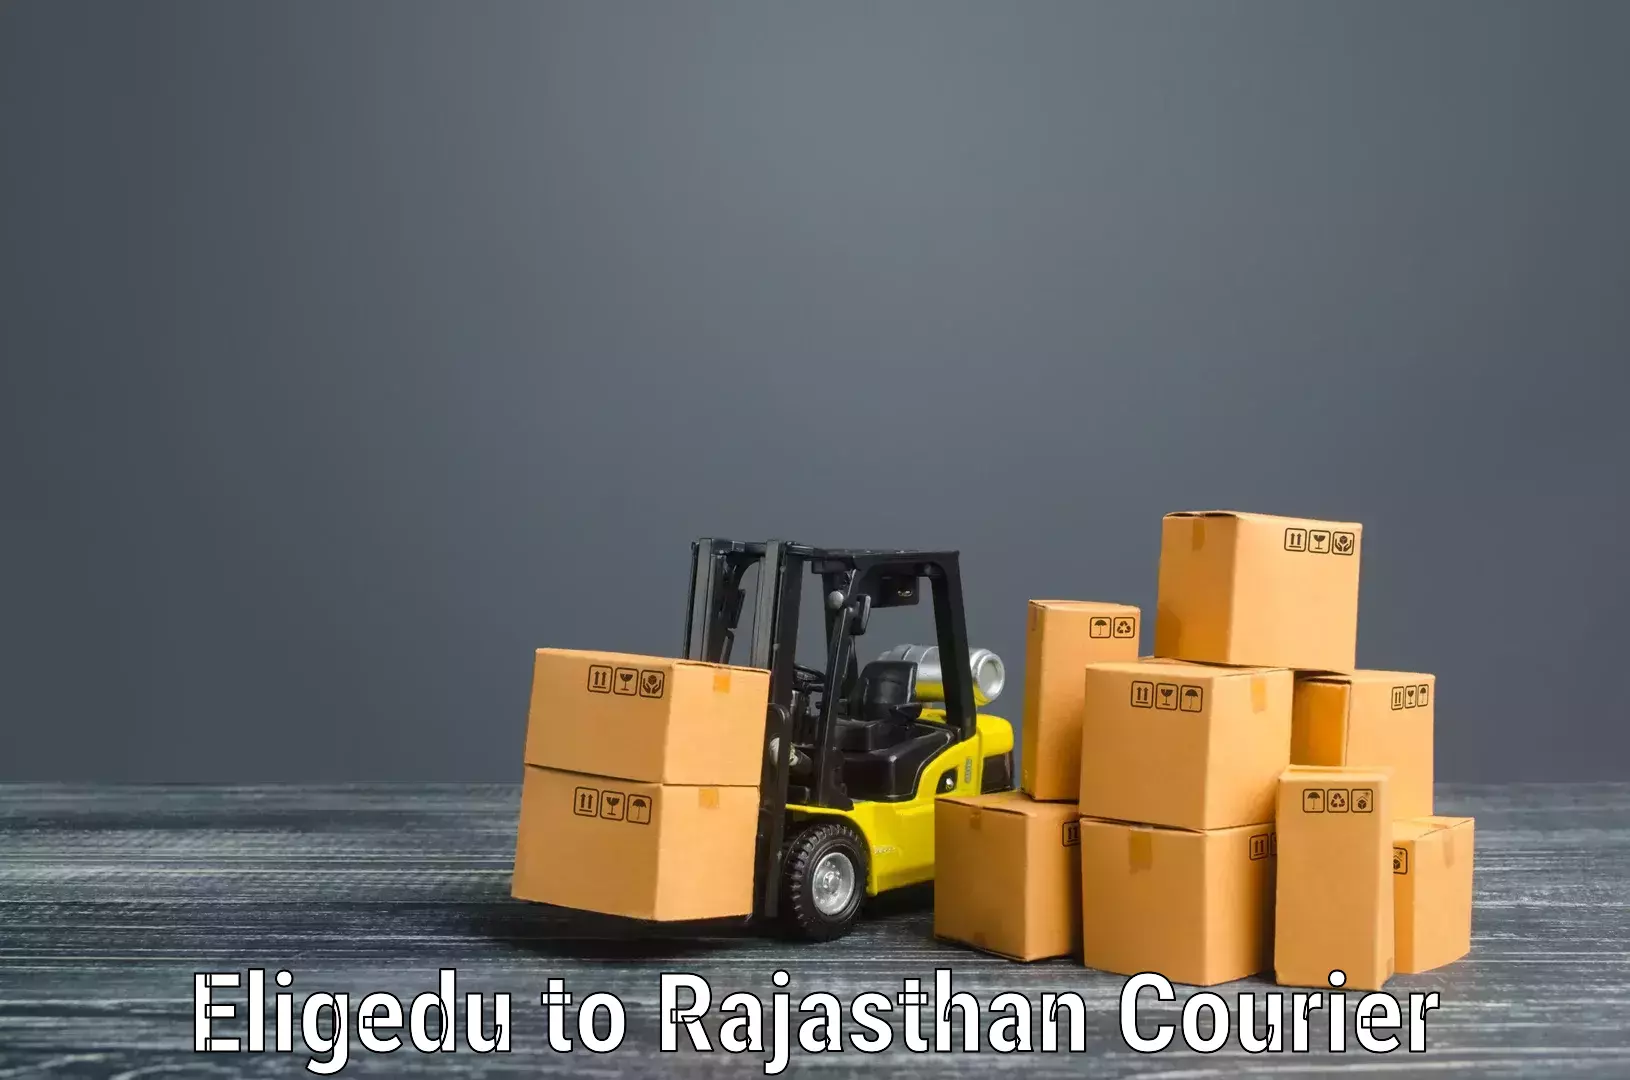 Stress-free household moving Eligedu to Rajasthan